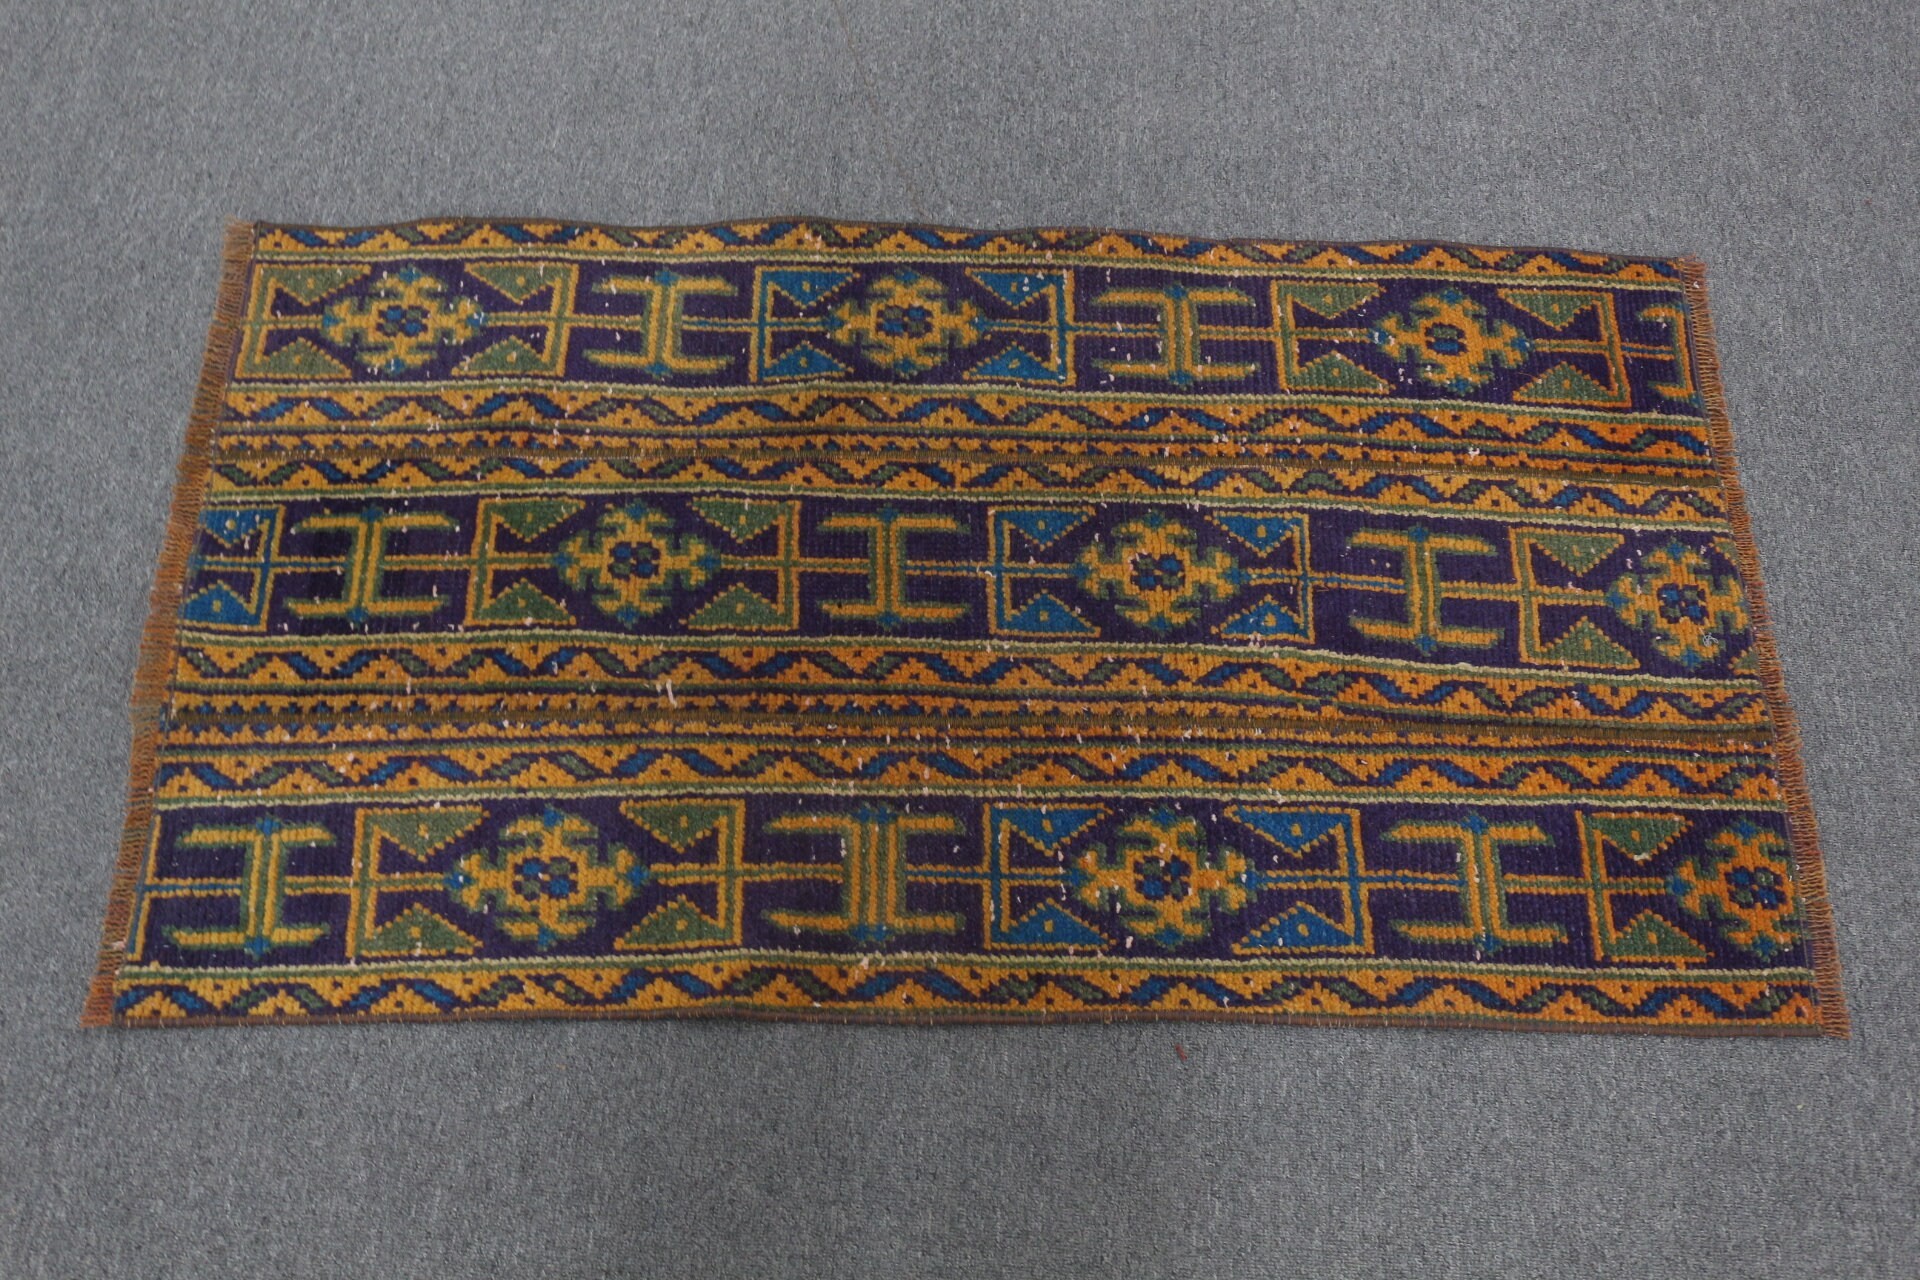 2.2x4 ft Small Rugs, Antique Rugs, Vintage Rug, Door Mat Rugs, Entry Rug, Wool Rug, Rugs for Car Mat, Turkish Rugs, Blue Oushak Rugs